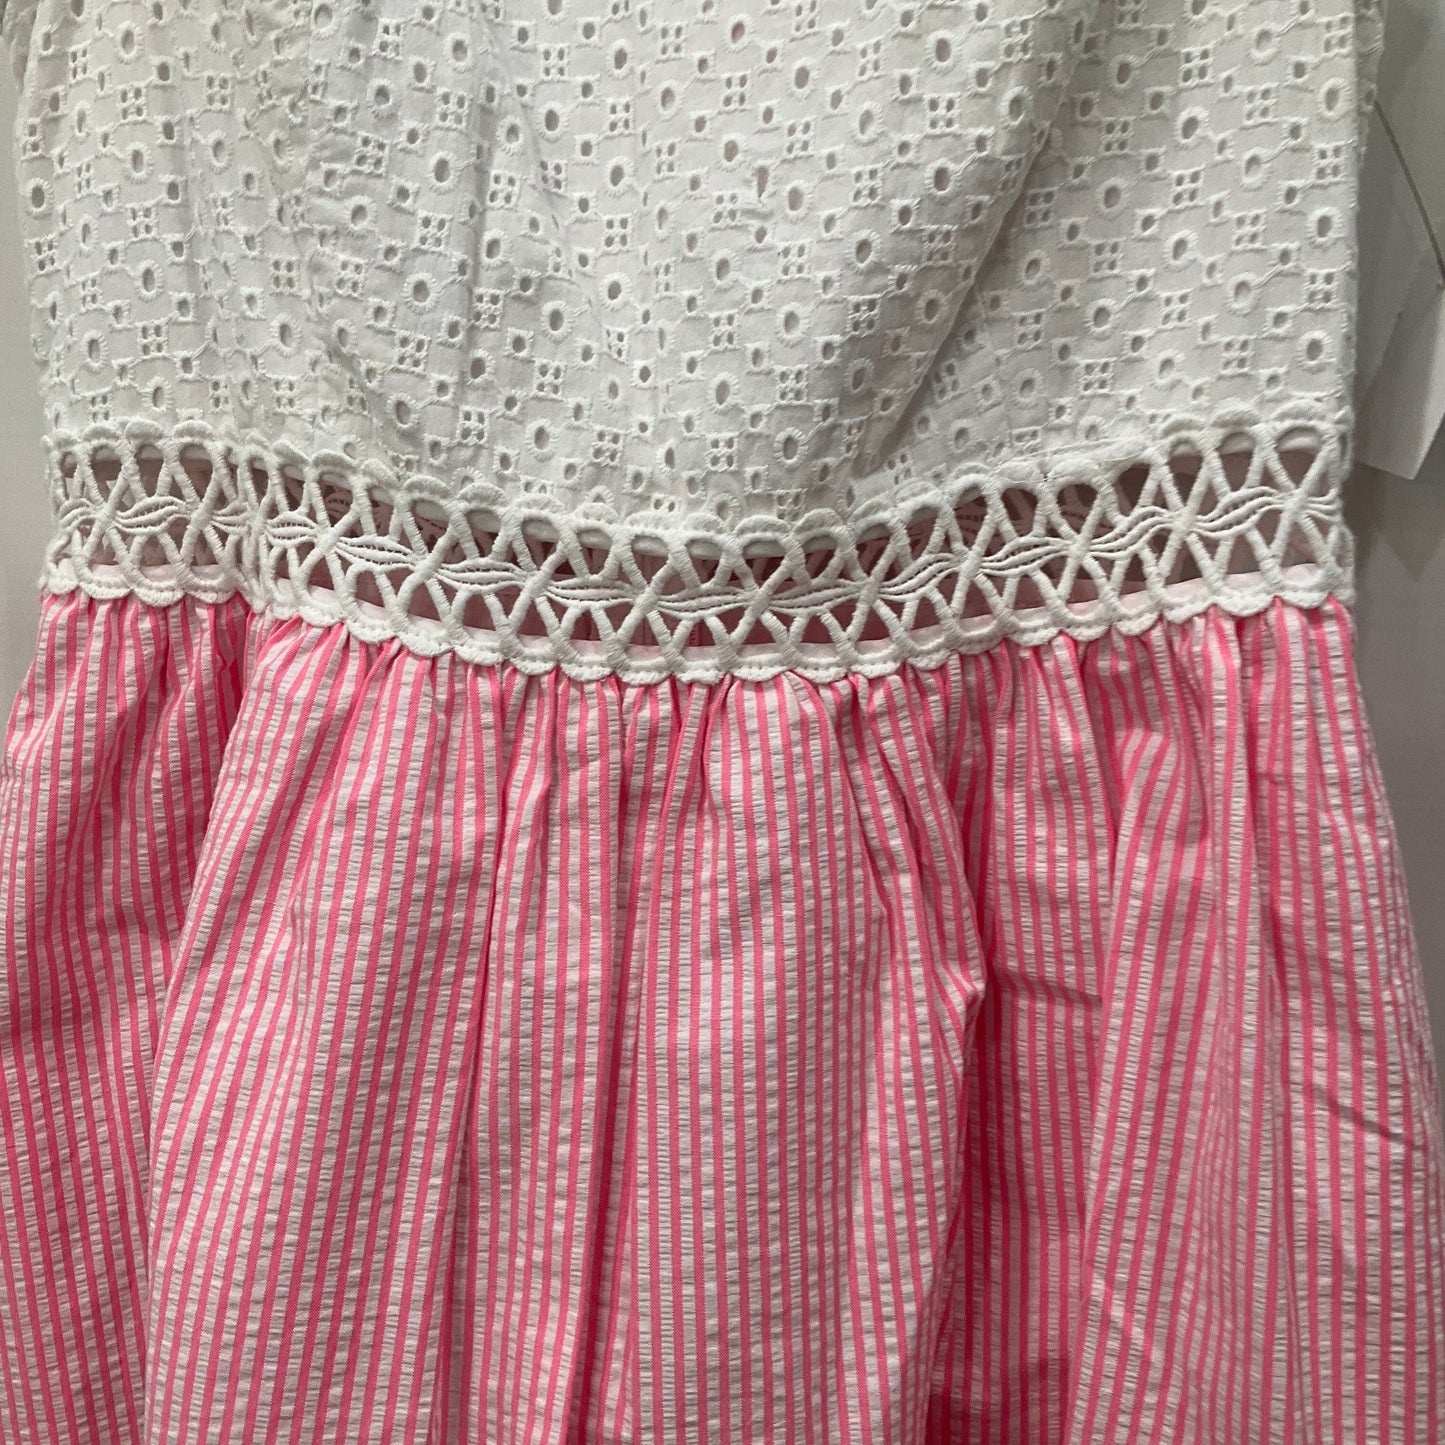 Pink & White Dress Casual Short Lilly Pulitzer, Size 4